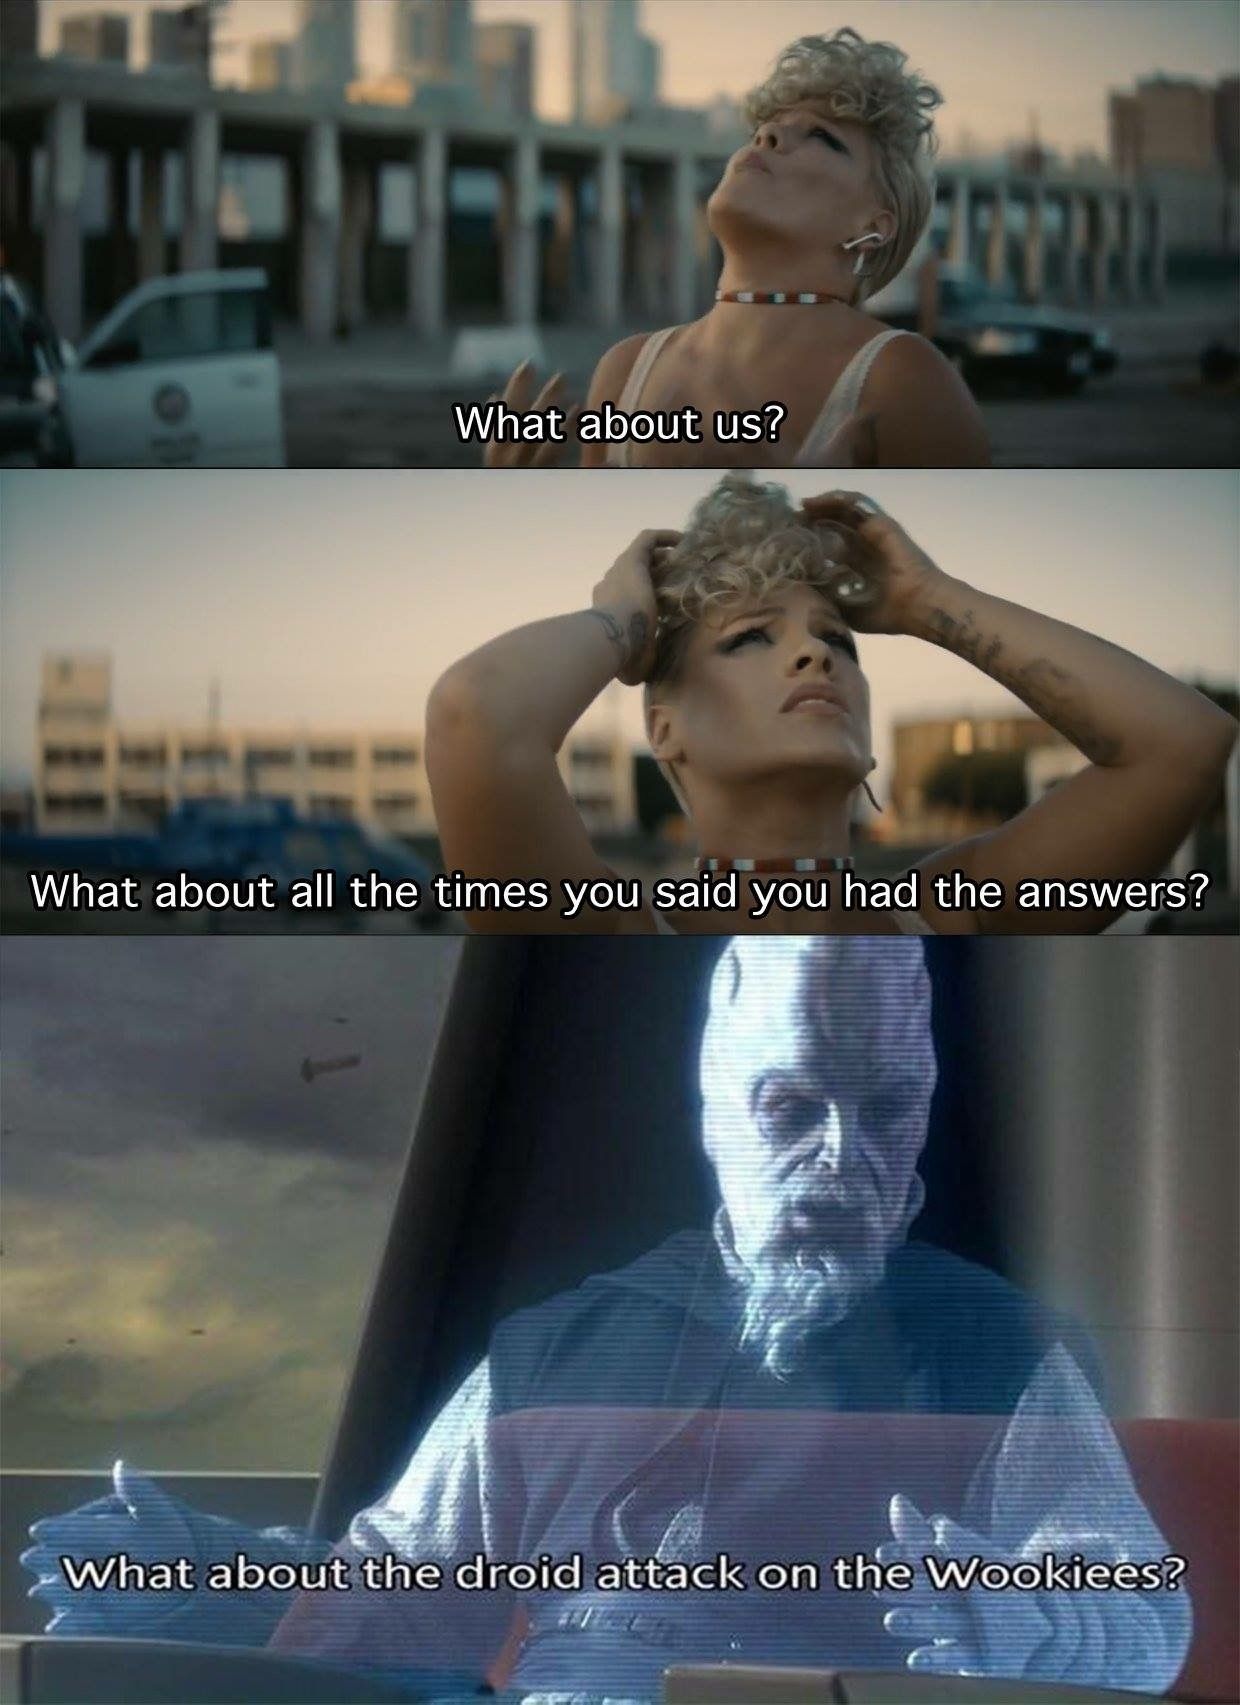 what about the wo-wookies?